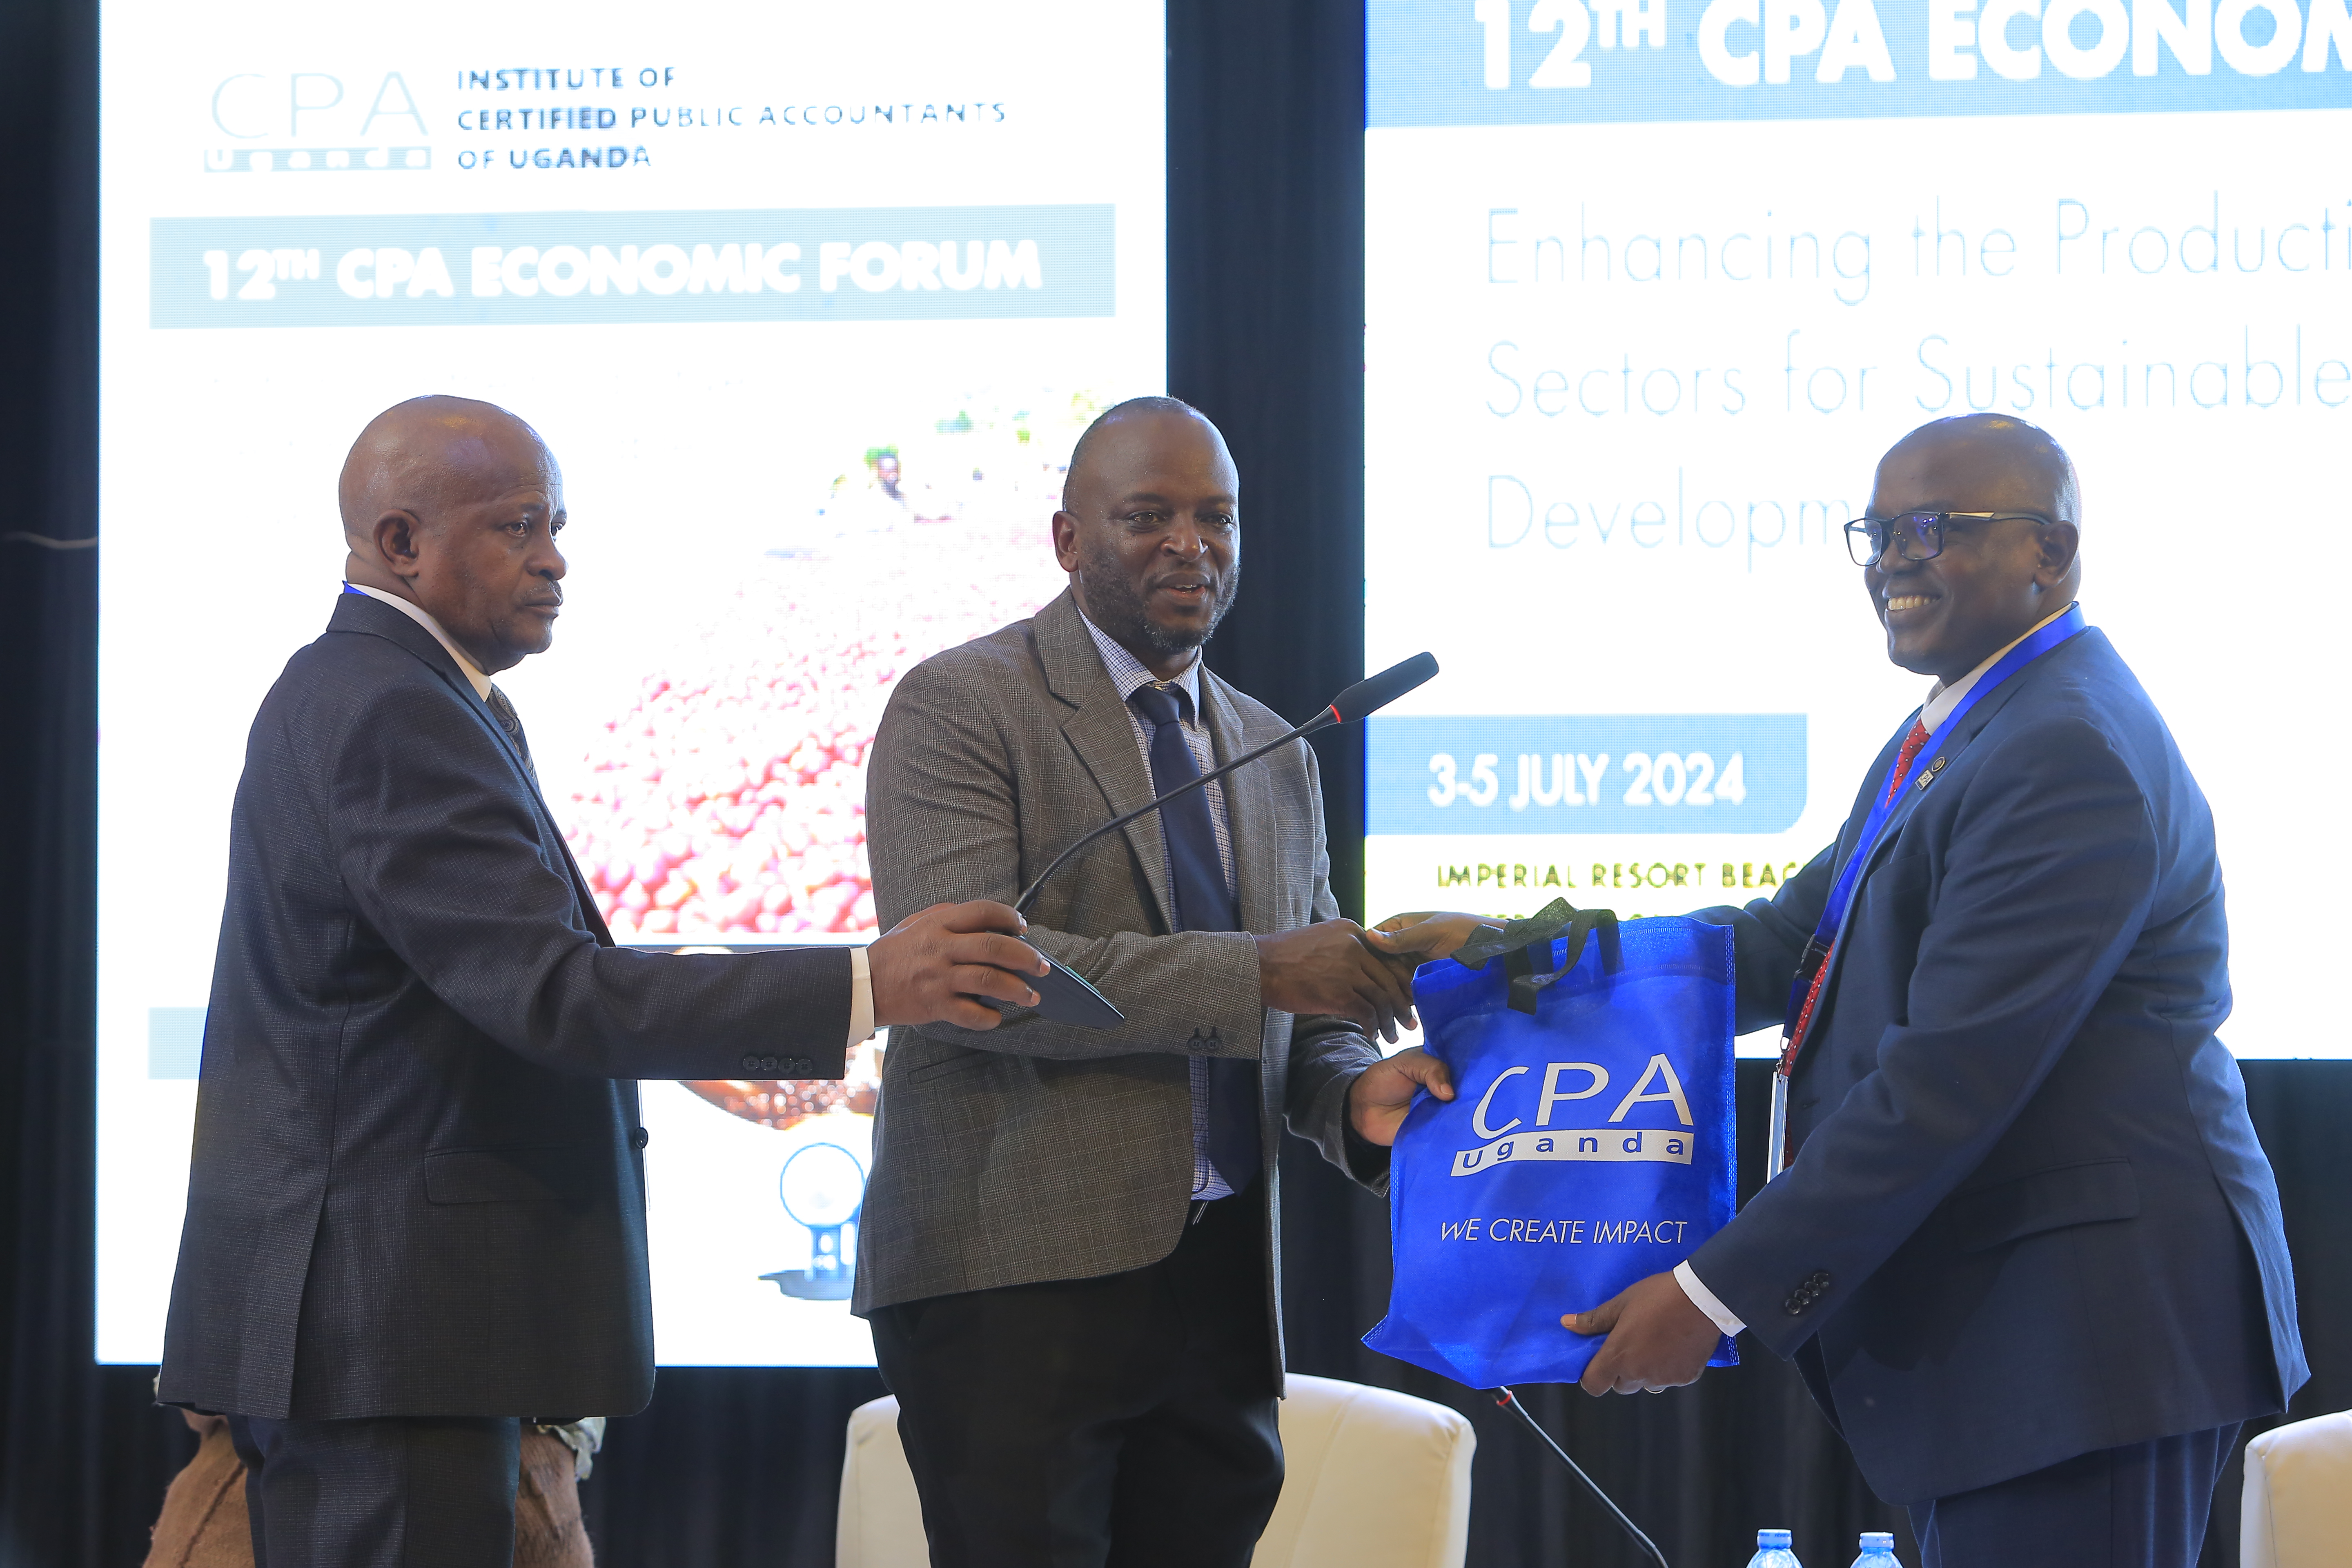 One of the Silver sponsors, Bank of Uganda (C) receiving a token of appreciation from ICPAU’s former President CPA Constant Mayende at the 12th CPA Economic Forum.